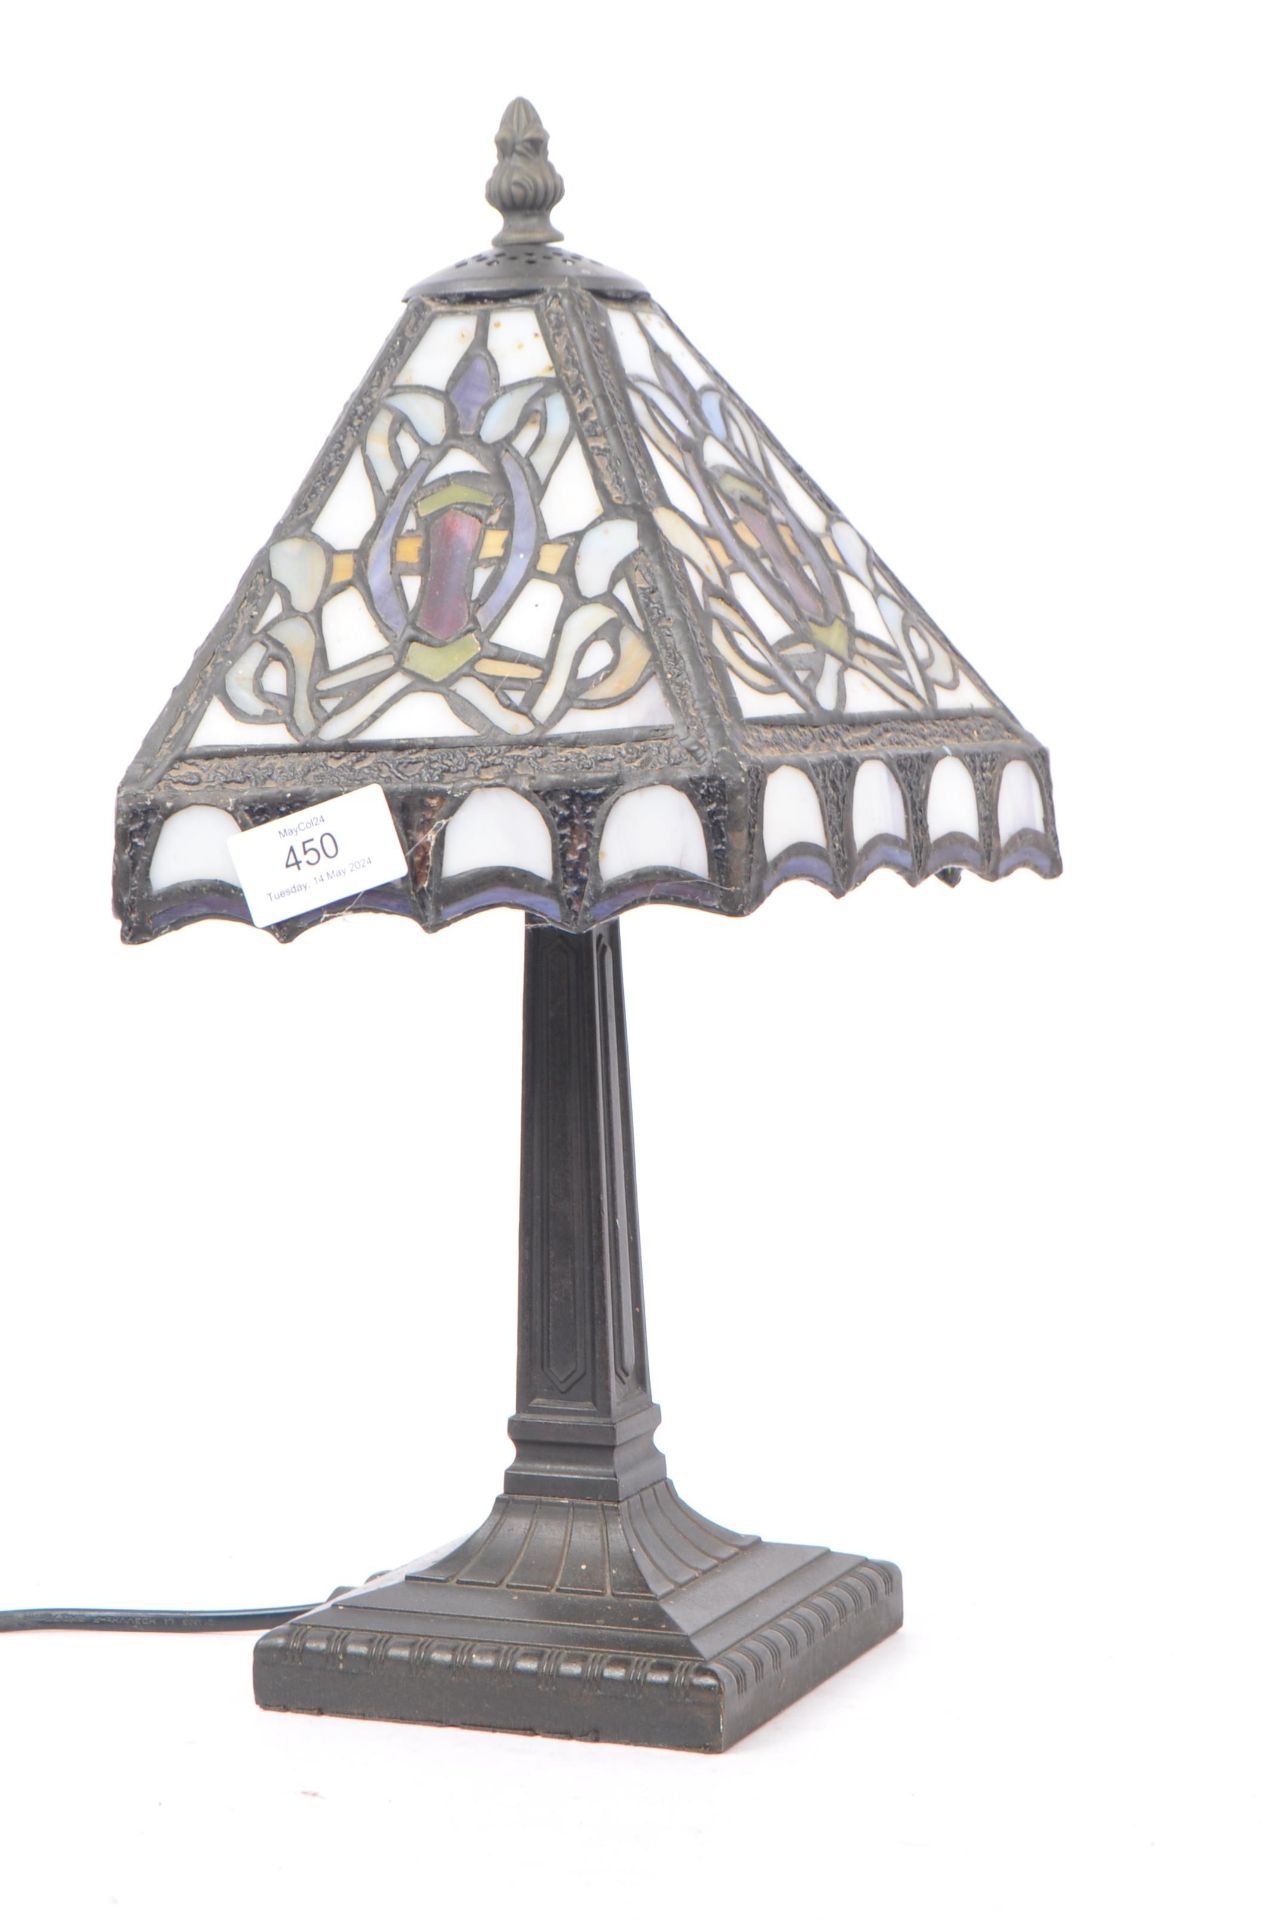 TIFFANY STYLE - 20TH CENTURY STAINED GLASS BEDSIDE LAMP - Image 2 of 5